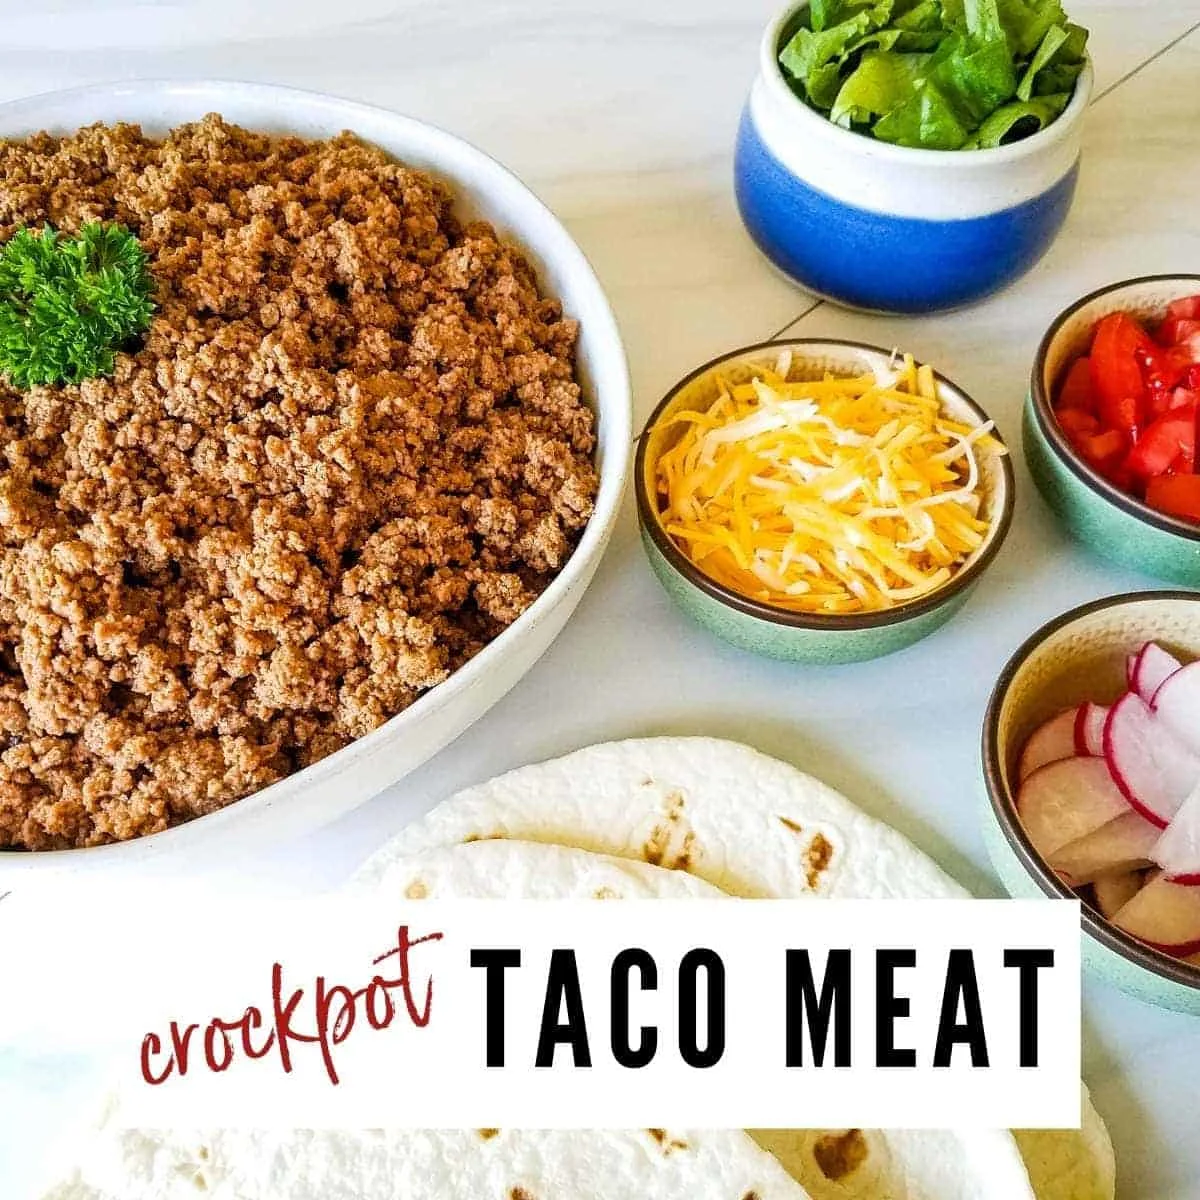 Crock pot taco meat with ingredients on separate bowls next to each other.